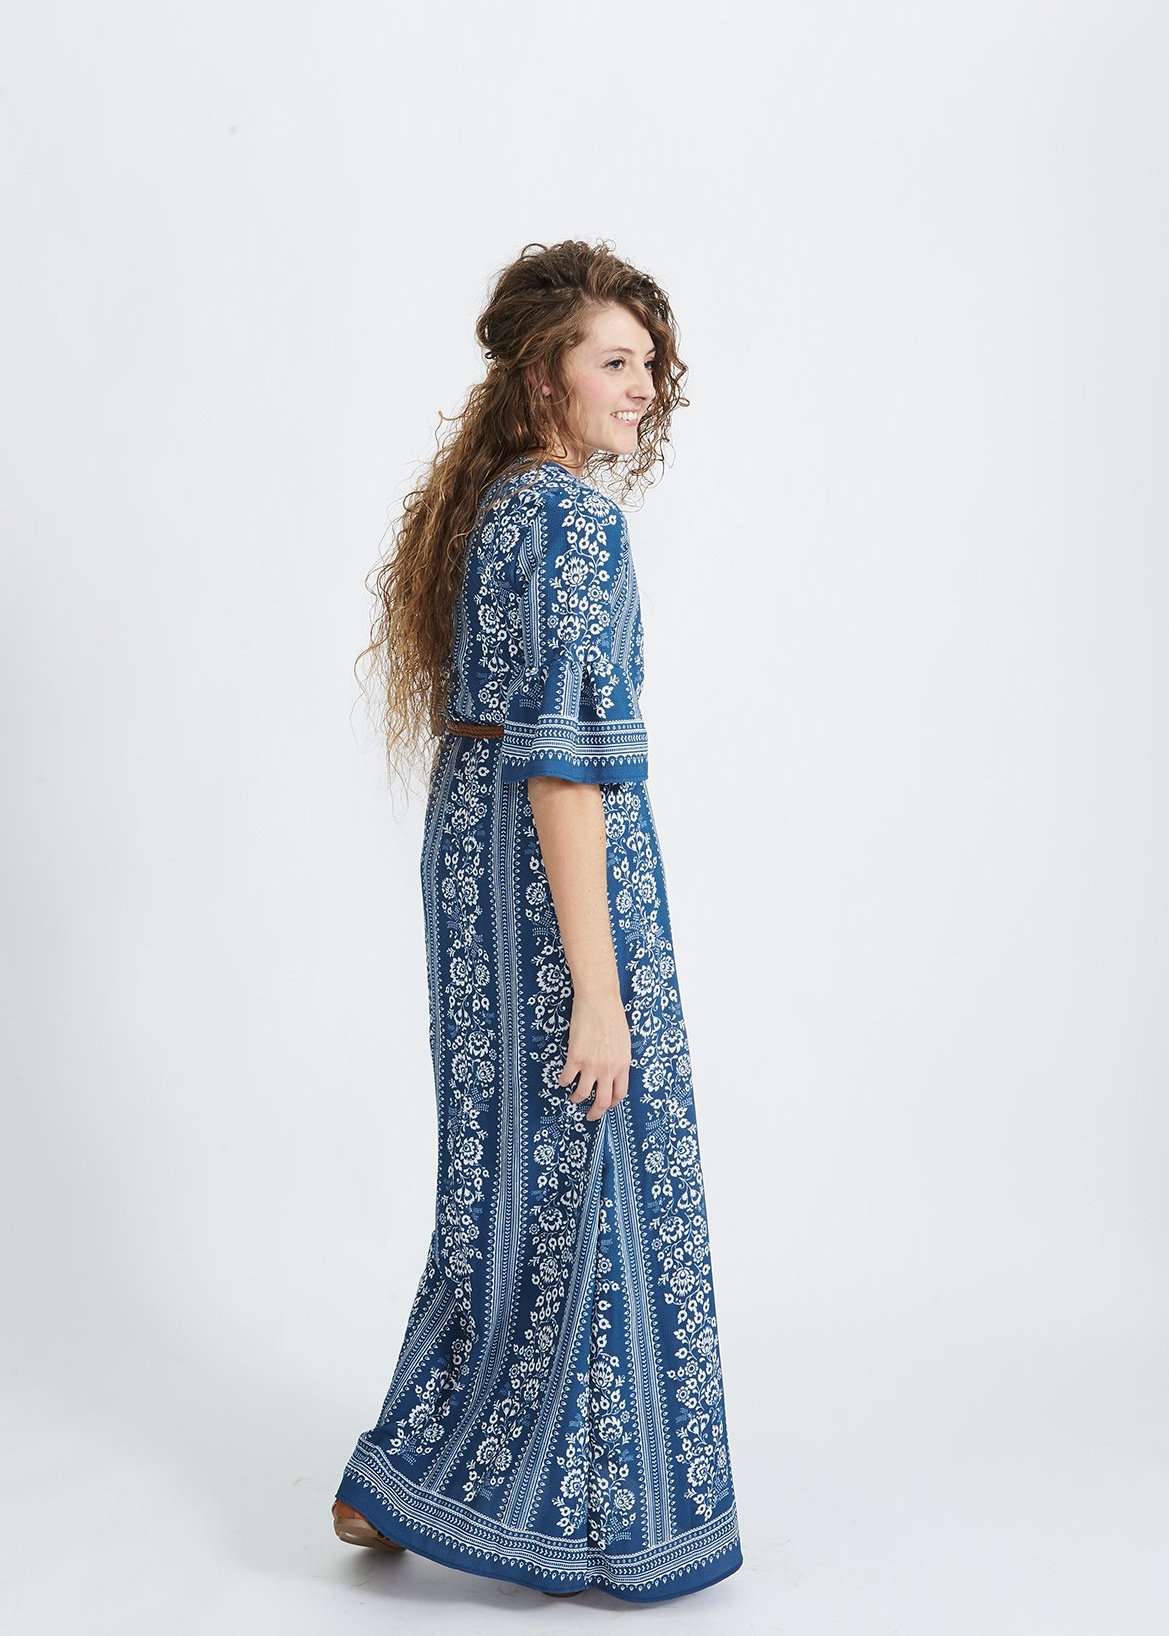 Woman wearing a long bohemian style blue dress with white accent designs and 3/4 trumpet style sleeves.